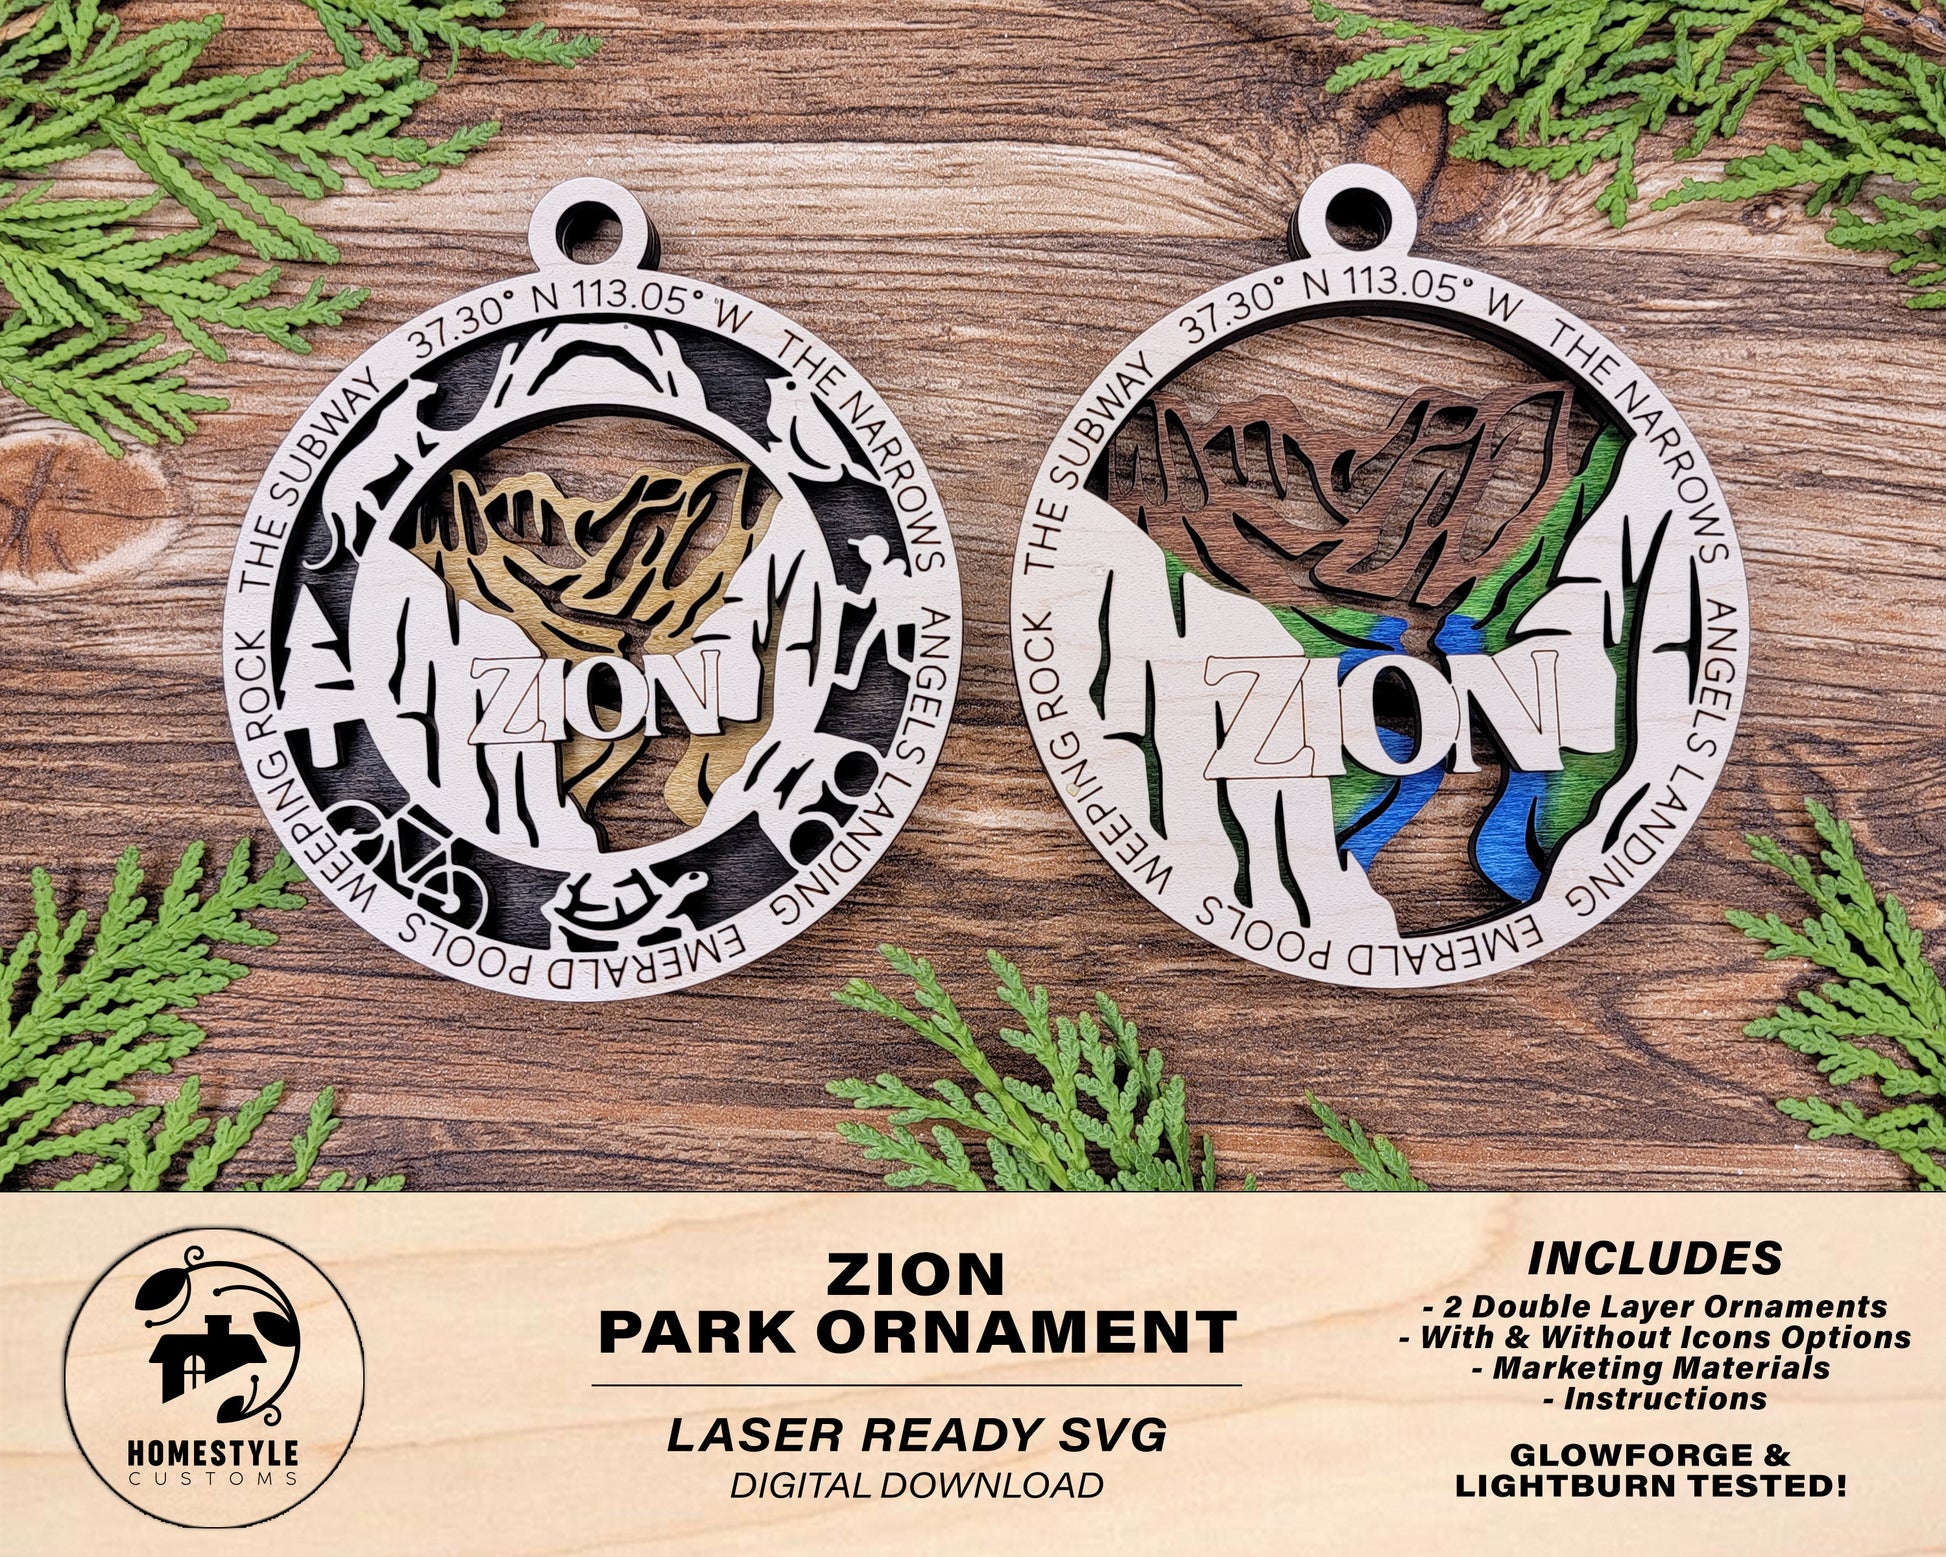 Zion Park Ornament - Includes 2 Ornaments - Laser Design SVG, PDF, AI File Download - Tested On Glowforge and LightBurn